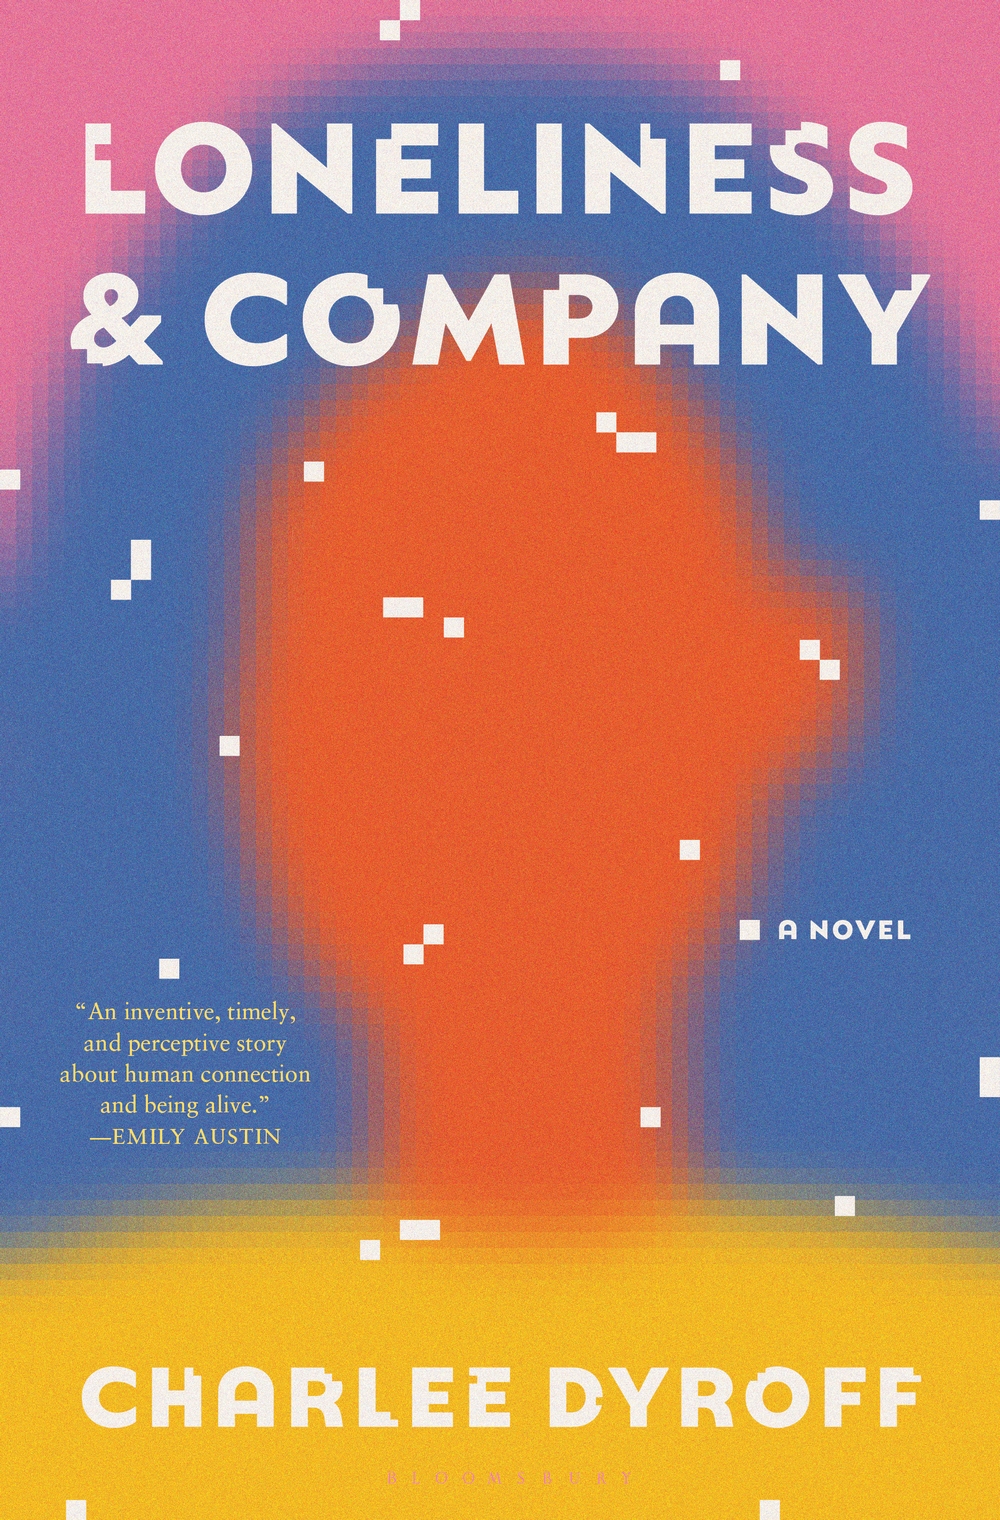 Book Launch: Loneliness and Company by Charlee Dyroff in conversation with Molly McGhee